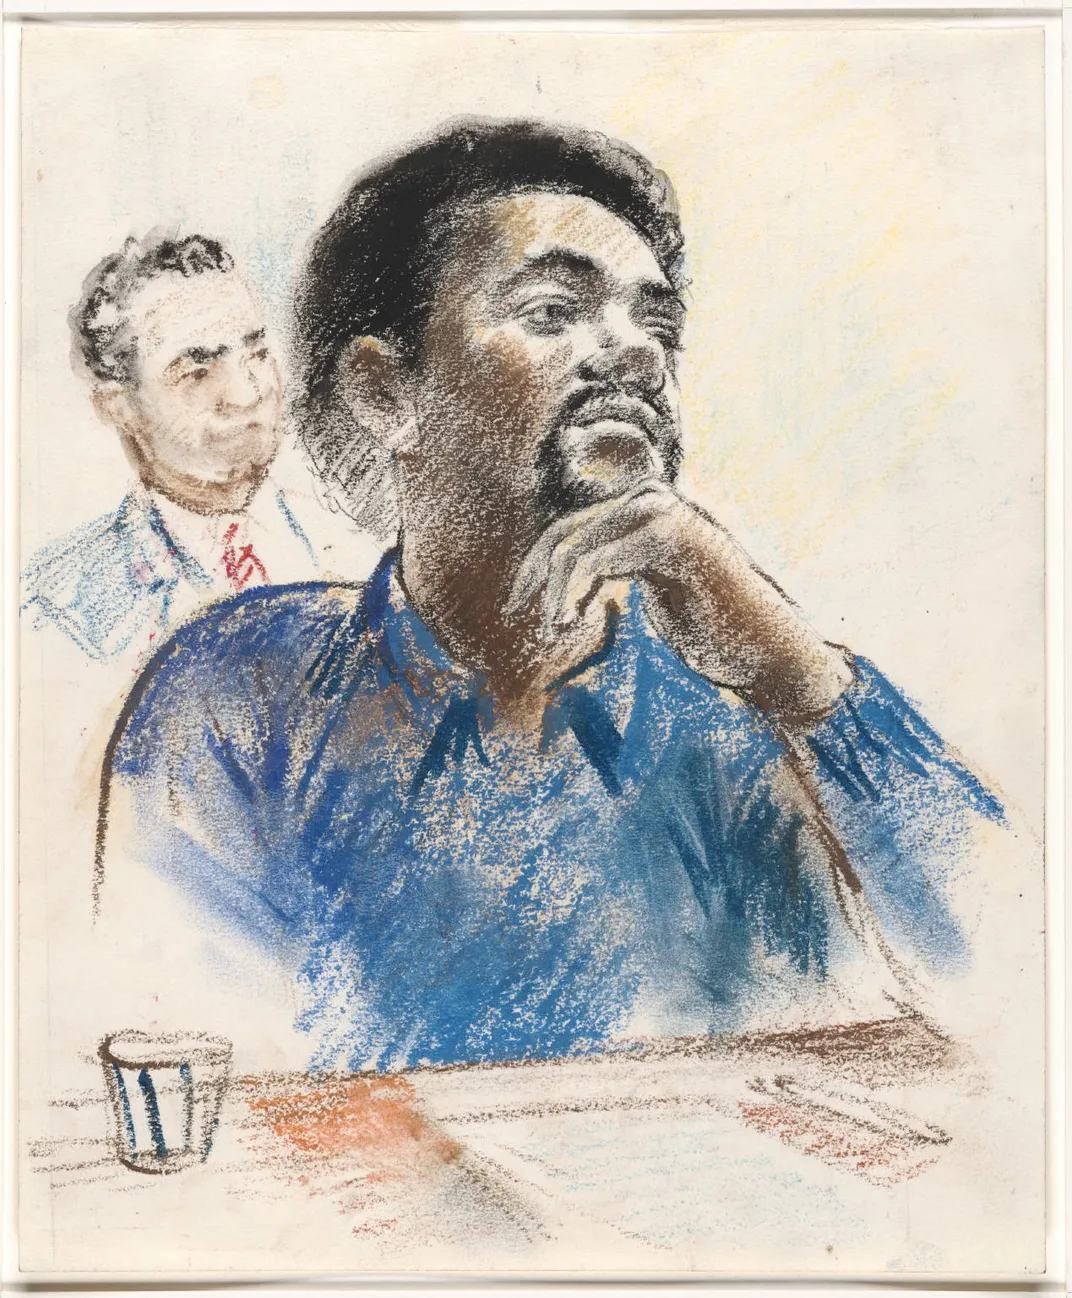 A sketch of Seale on the witness stand in 1971